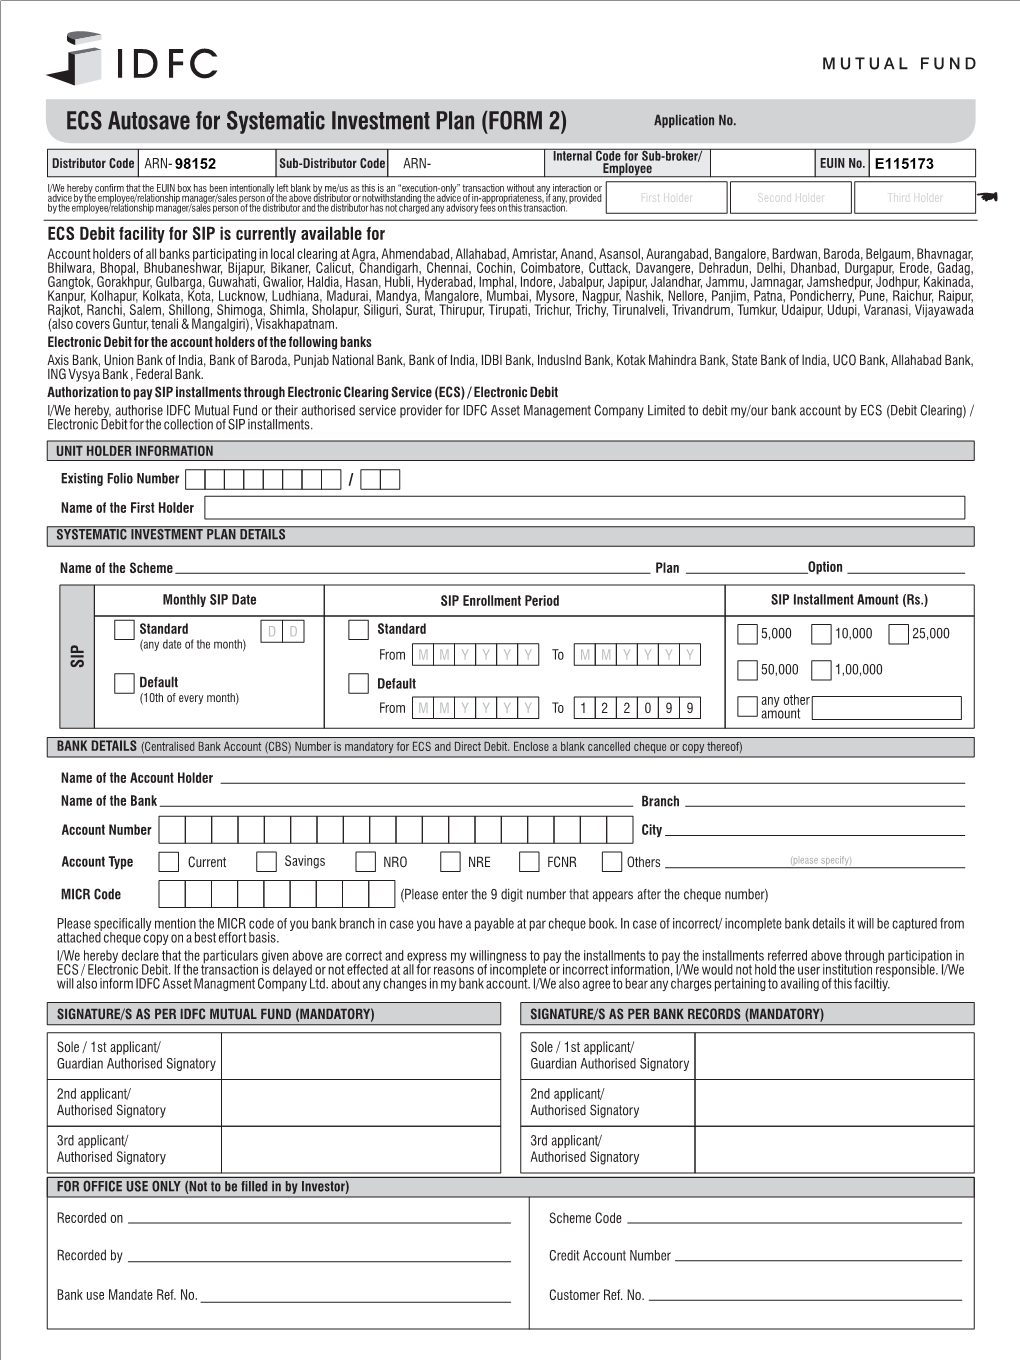 ECS Autosave for Systematic Investment Plan (FORM 2) Application No